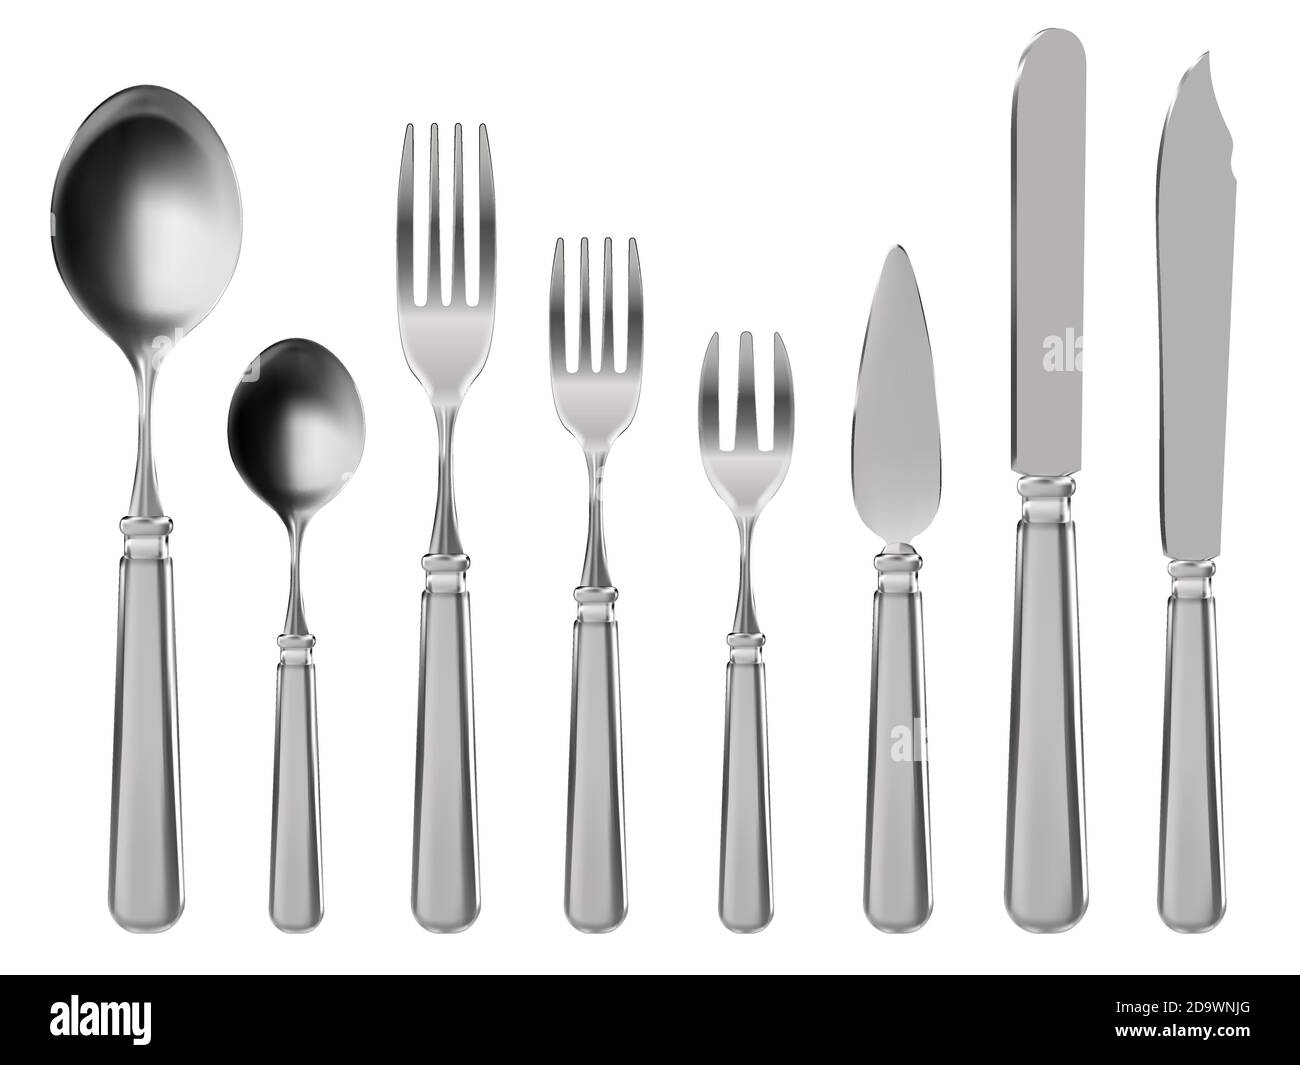 Realistic cutlery. Stainless steel tableware, knife, spoon and forks. Restaurant or home kitchen 3d silverware vector illustration set Stock Vector